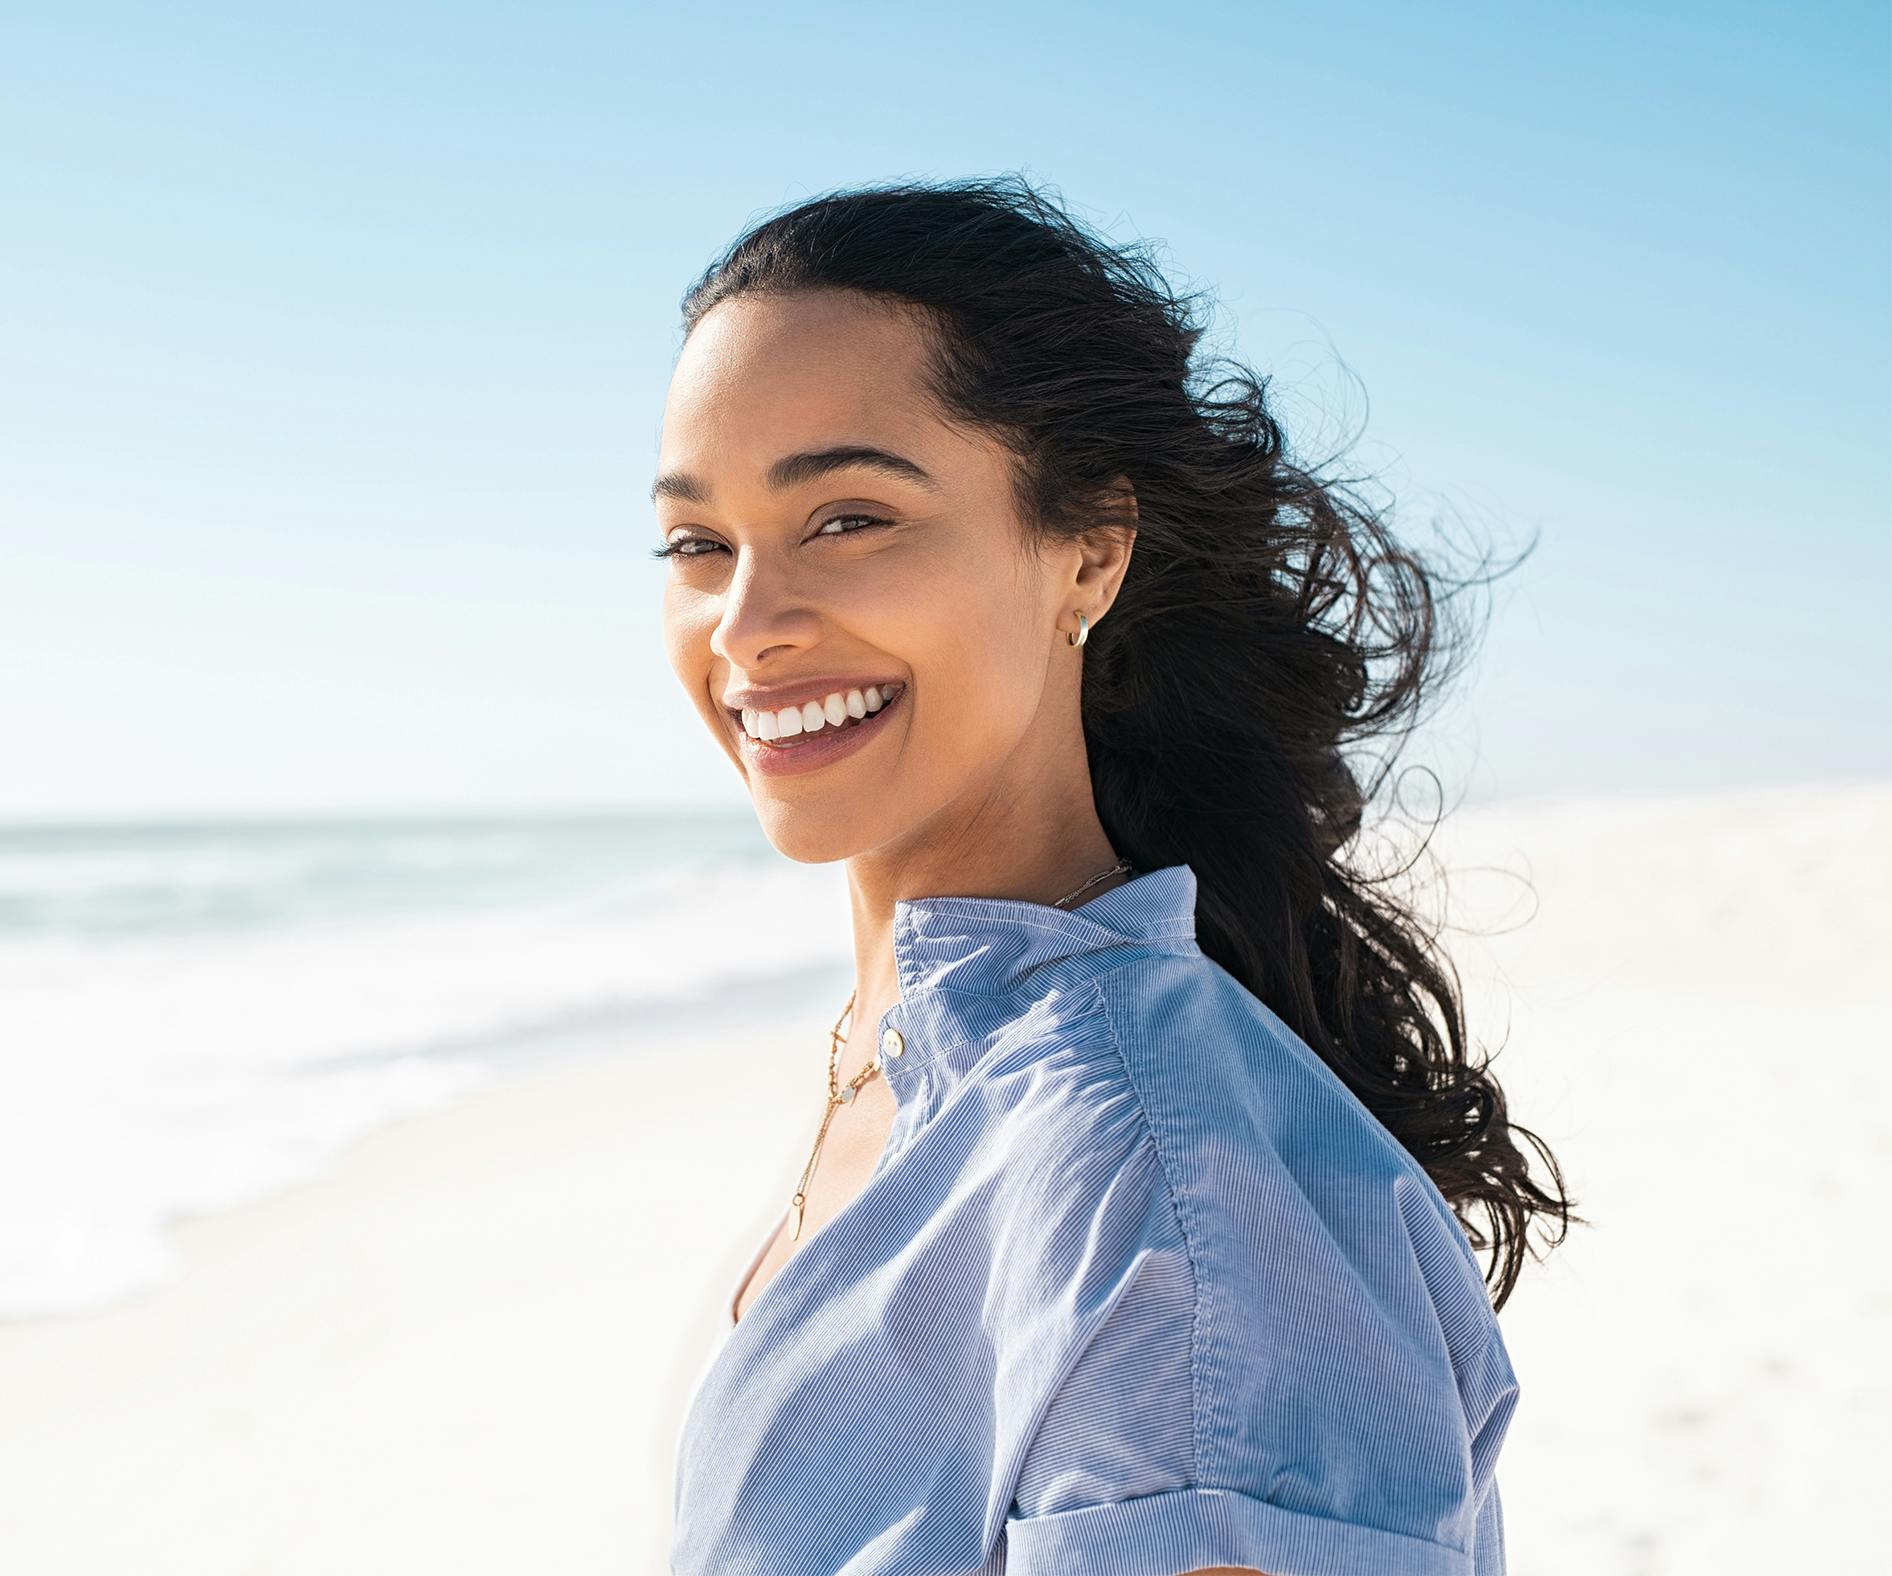 smiling woman on the beach with a blue shirt and white sand